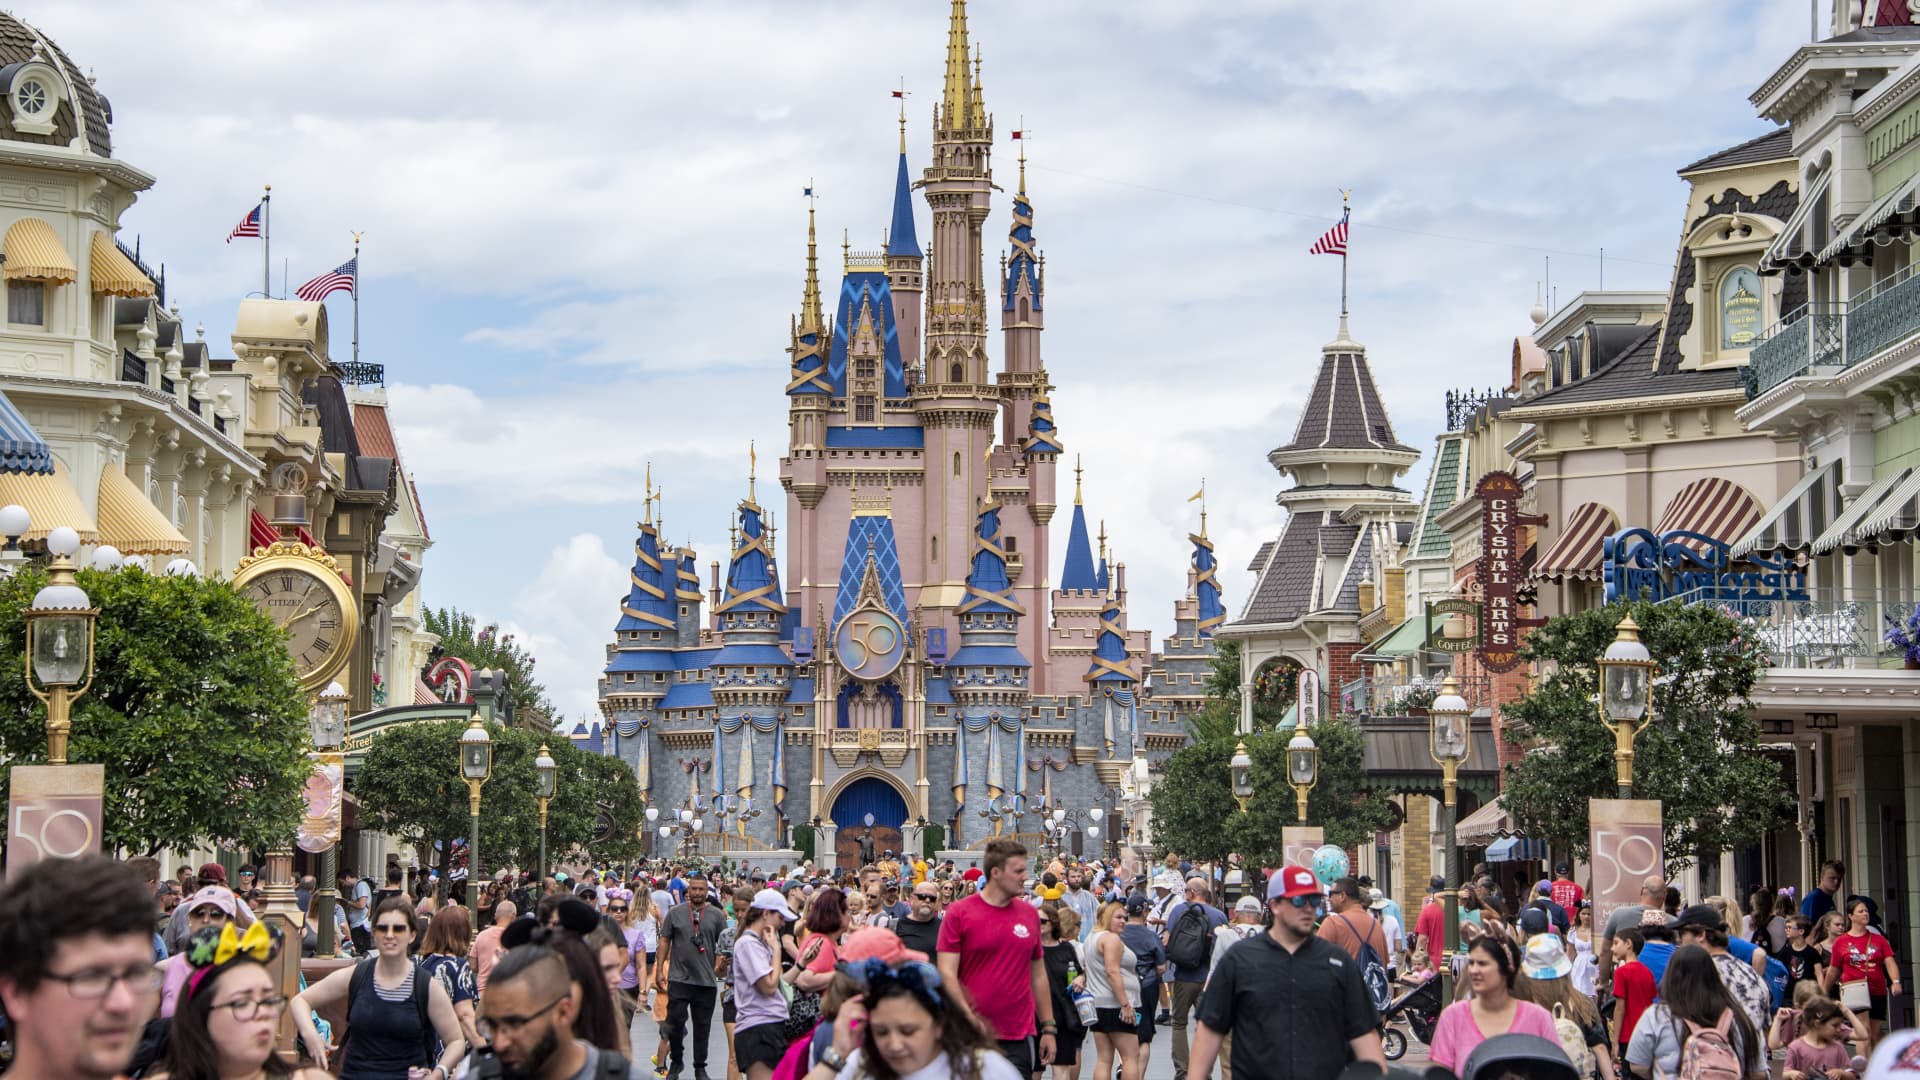 Disney World is packed, but lines can be short — if you follow several tips